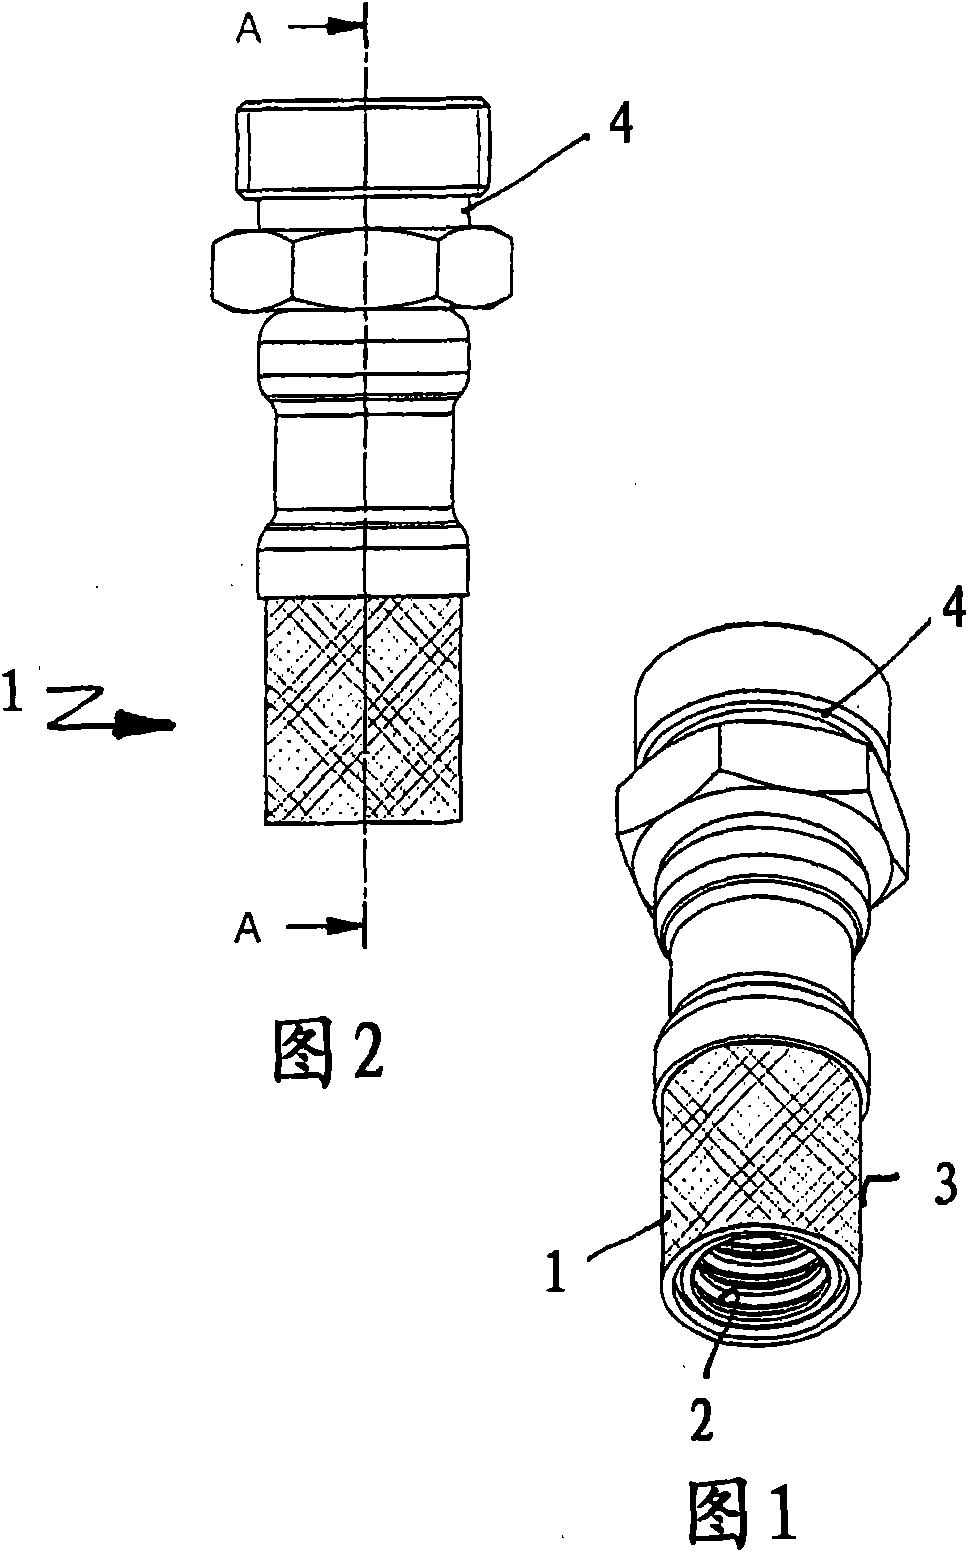 Pressure hose for use in water-guiding system